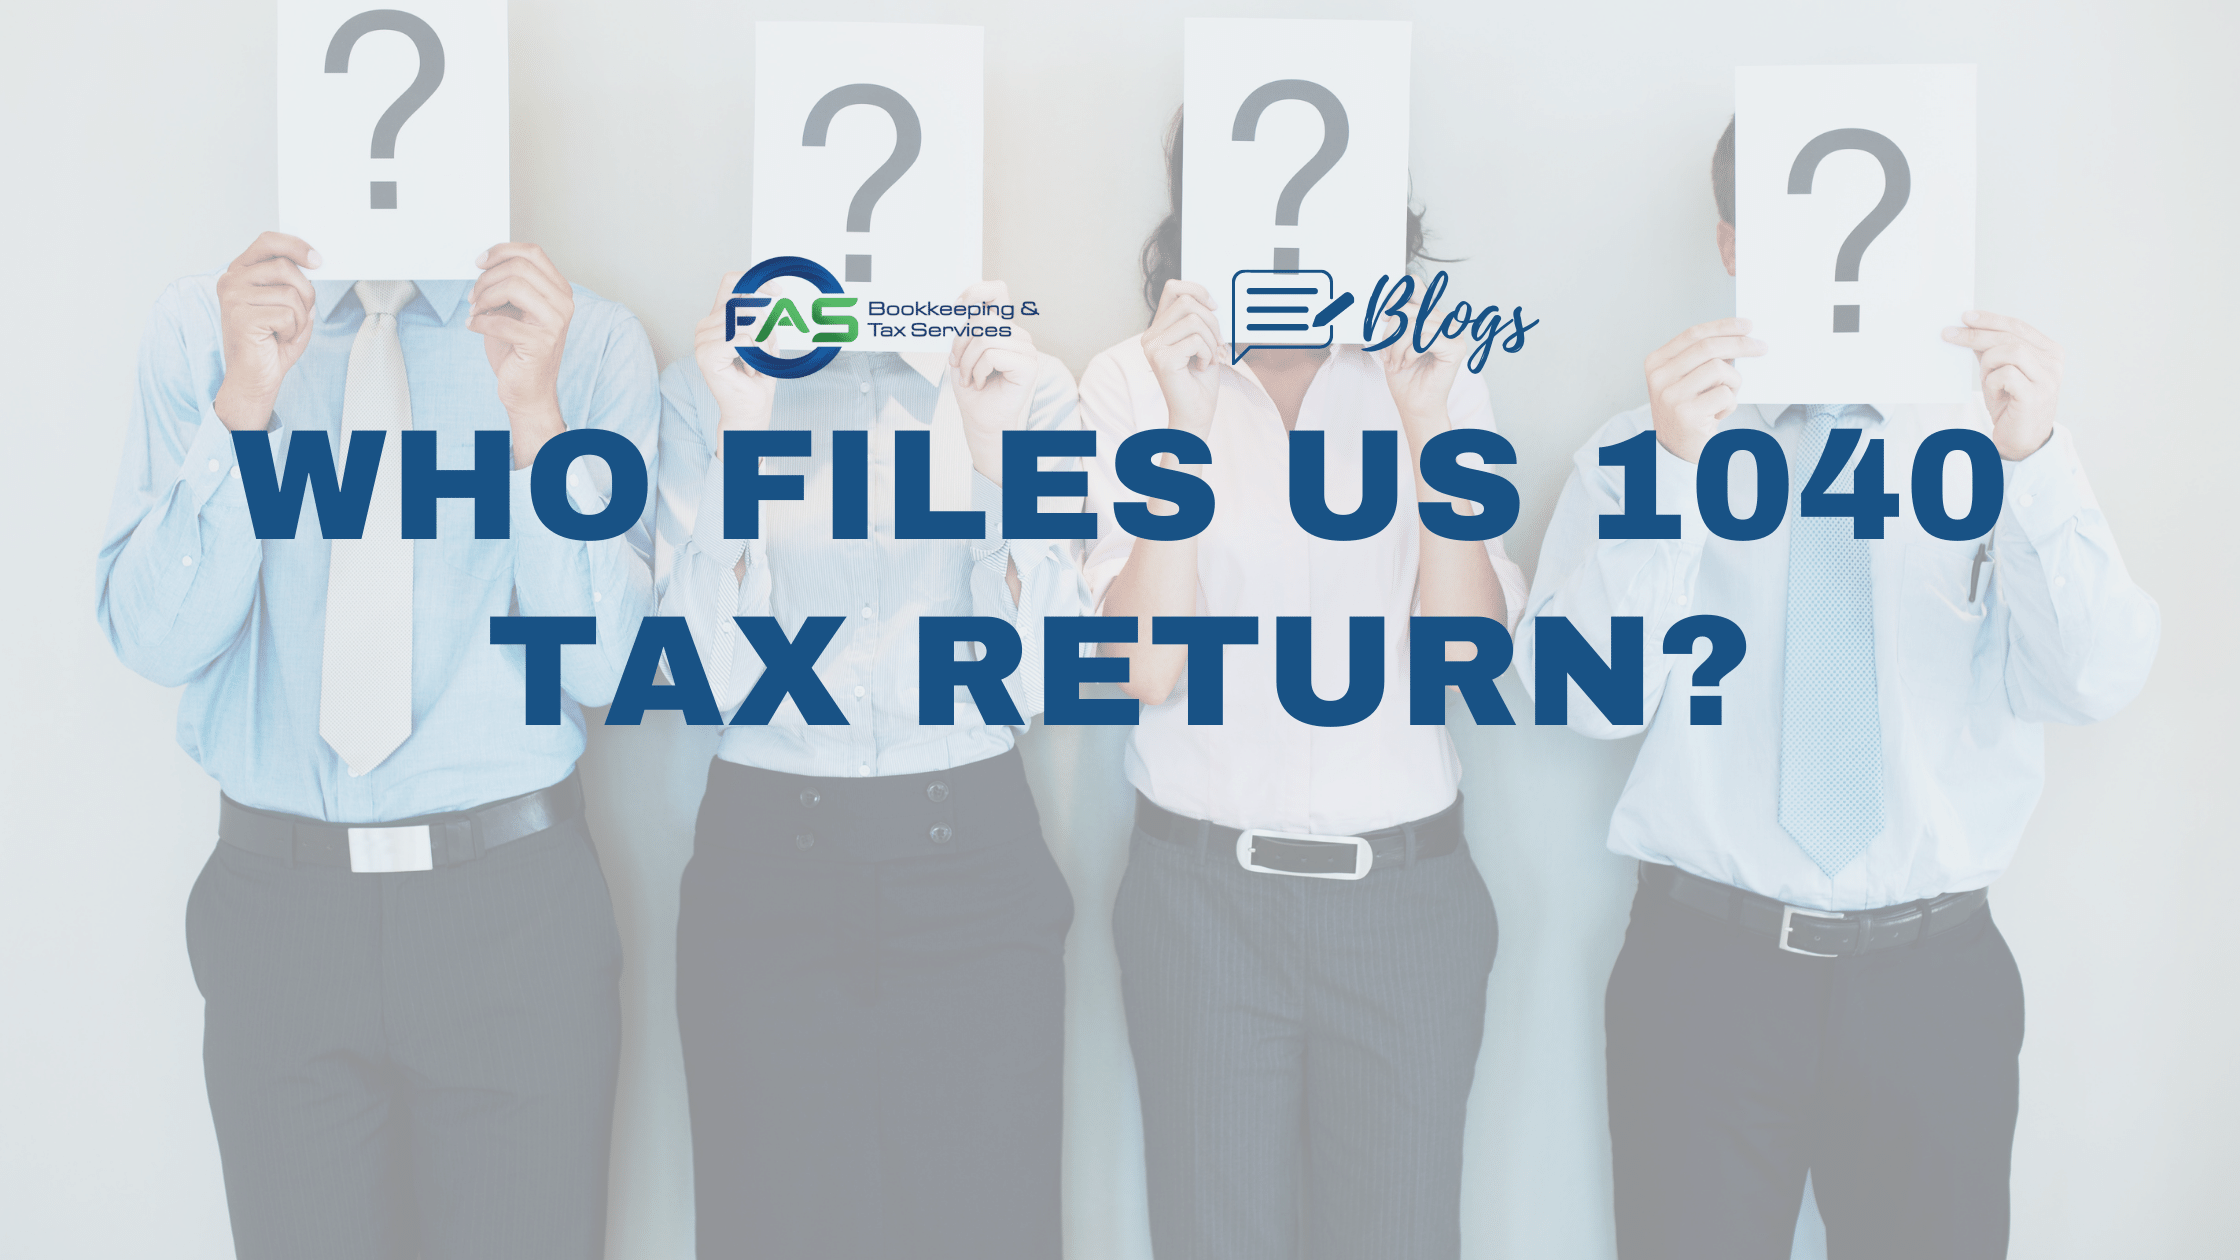 a bunch of people asking who files us 1040 tax return